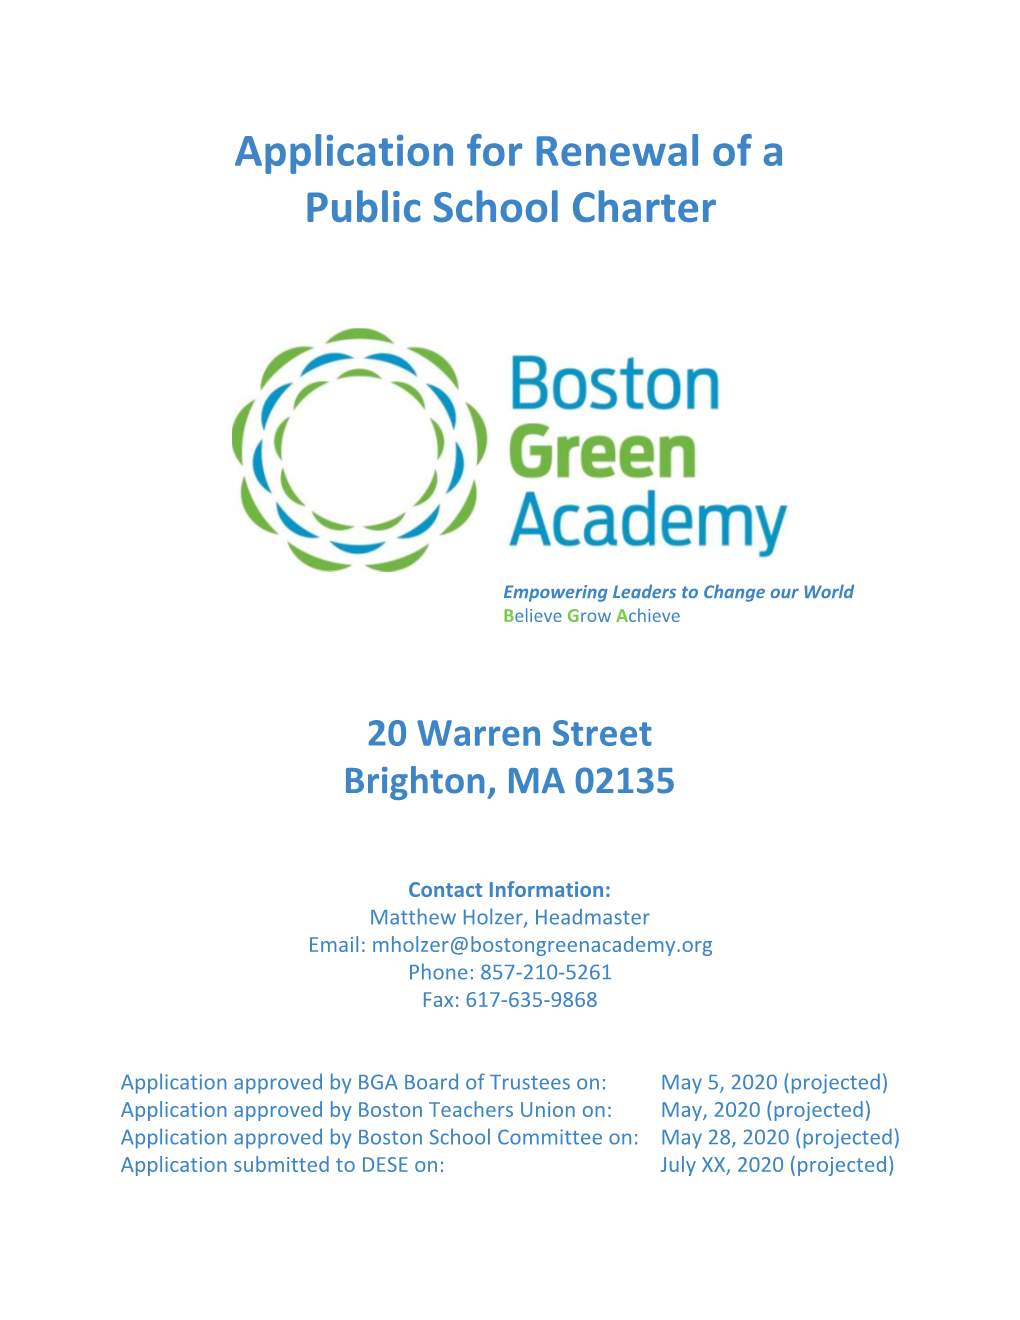 Application for Renewal of a Public School Charter